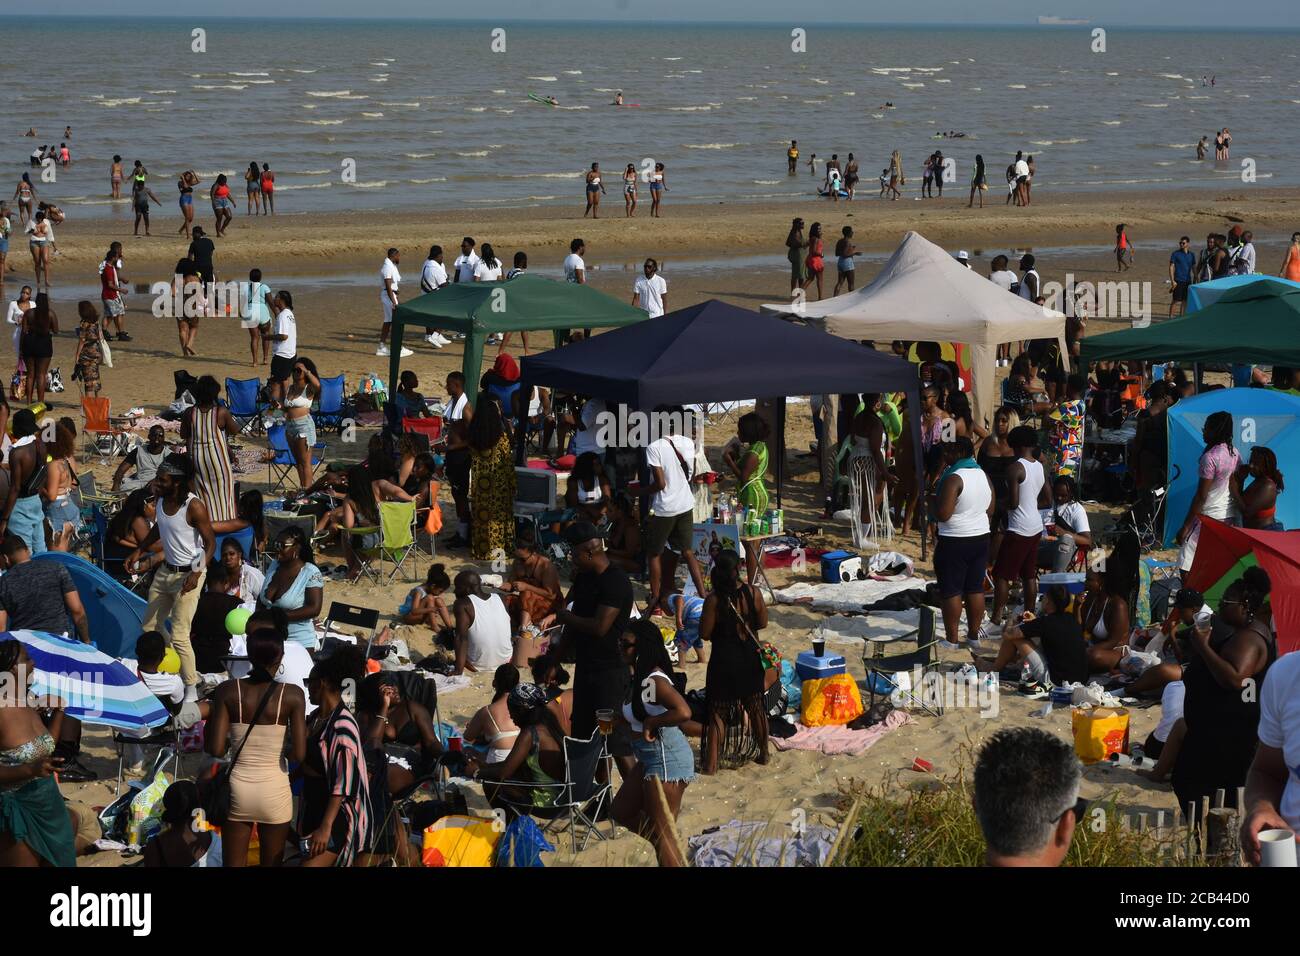 Hundreds descend upon the beach at Camber Sands to celebrate the anniversary of Jamaican independence which occurred back in 1962. Fears of a second spike of Covid 19 seemed to be in the backs of peoples minds as social distancing became difficult at times. Police presence observe the crowds at a safe distance while reminding people to keep a safe distance where possible. Event organisers encouraged social distancing throughout the day and asked everybody to be as safe and tidy as possible and also made a £750 donation to local litter picking to assist with litter Stock Photo